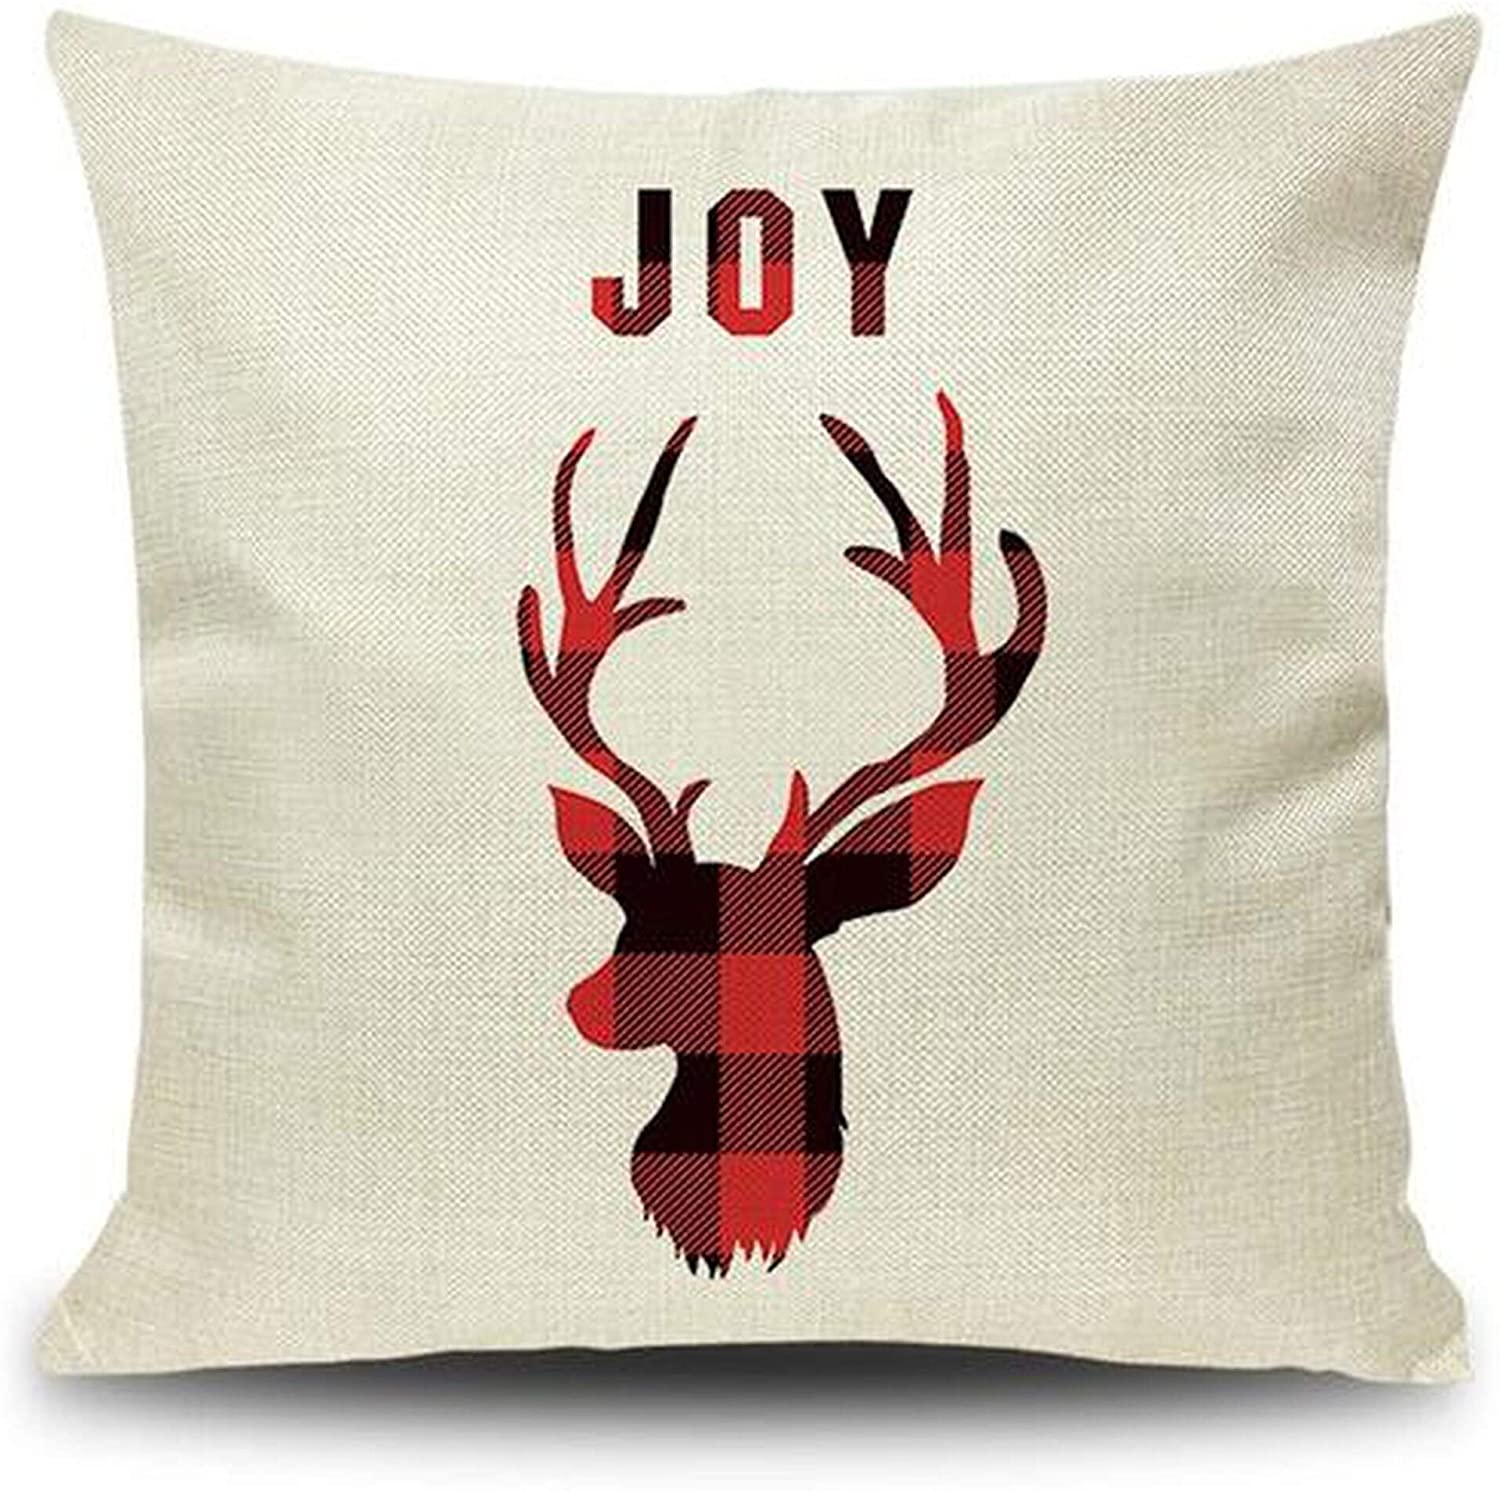 Merry Christmas Printed Throw Pillow Case 45x45cm 20991024 182 Color Graphic Casual Cotton Removable Cover